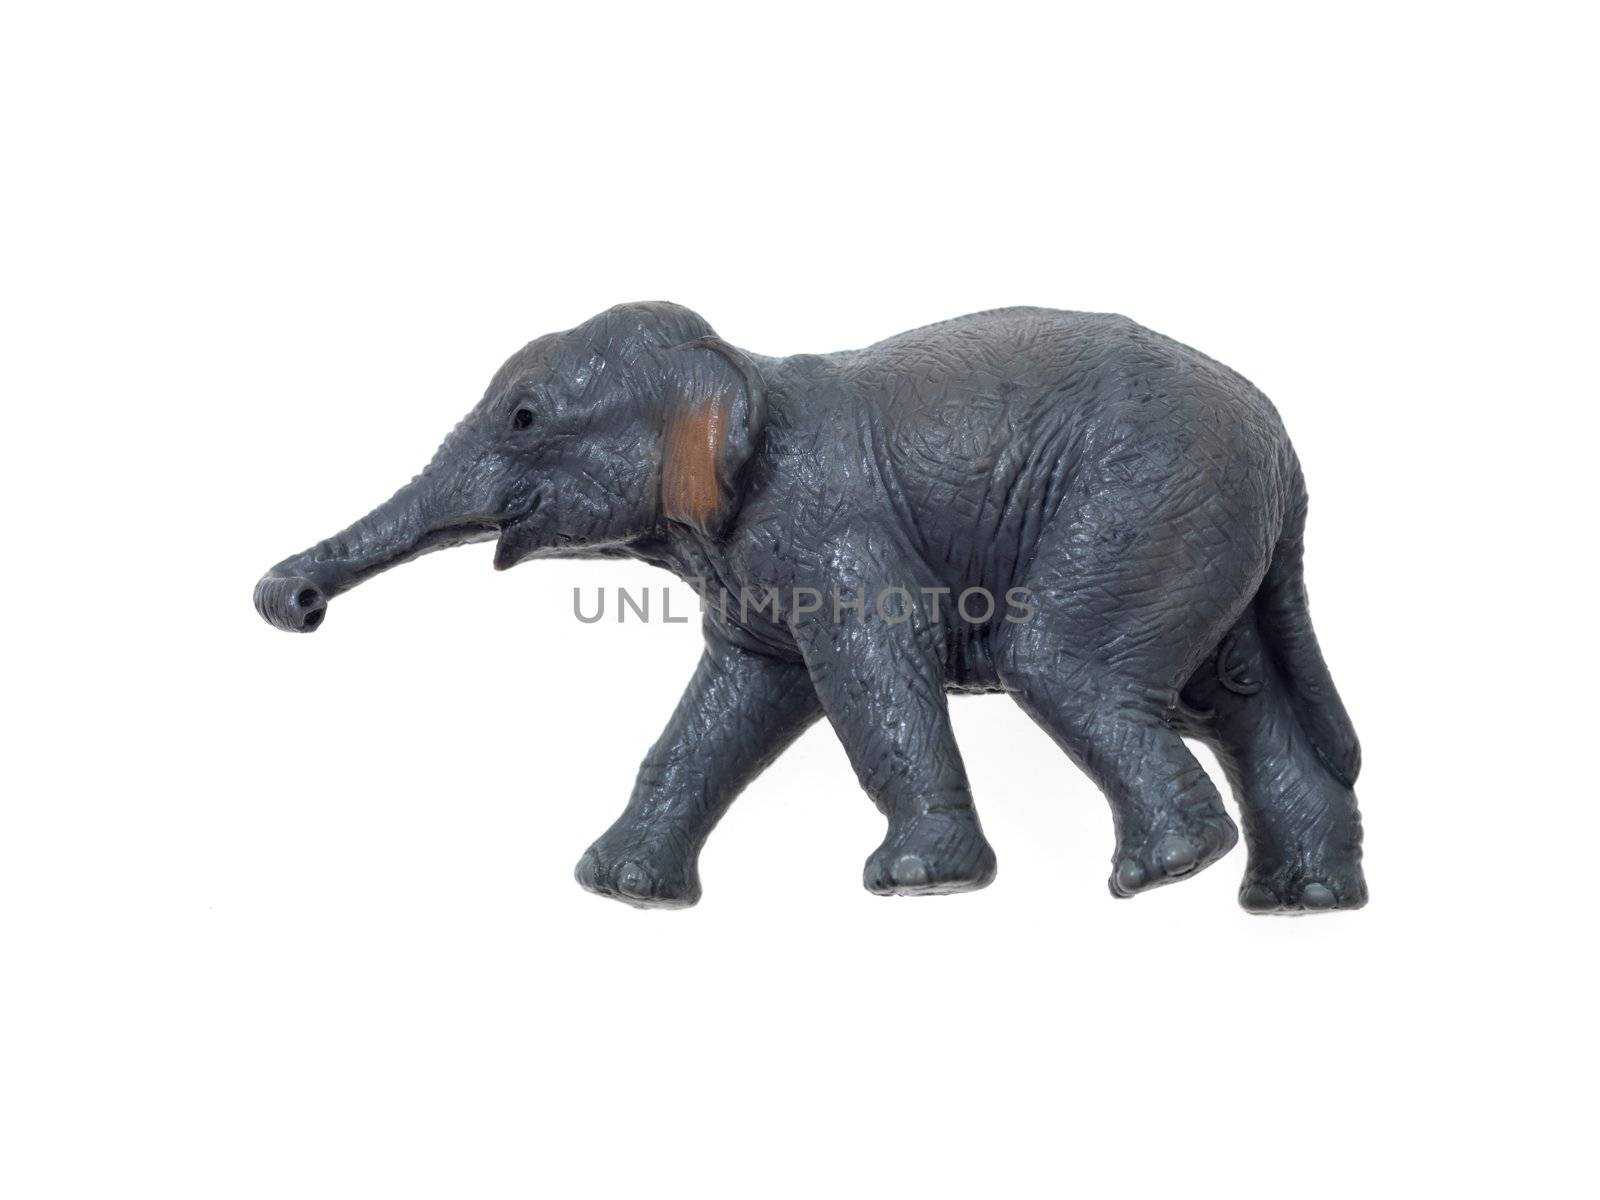 Toy animals isolated against a white background